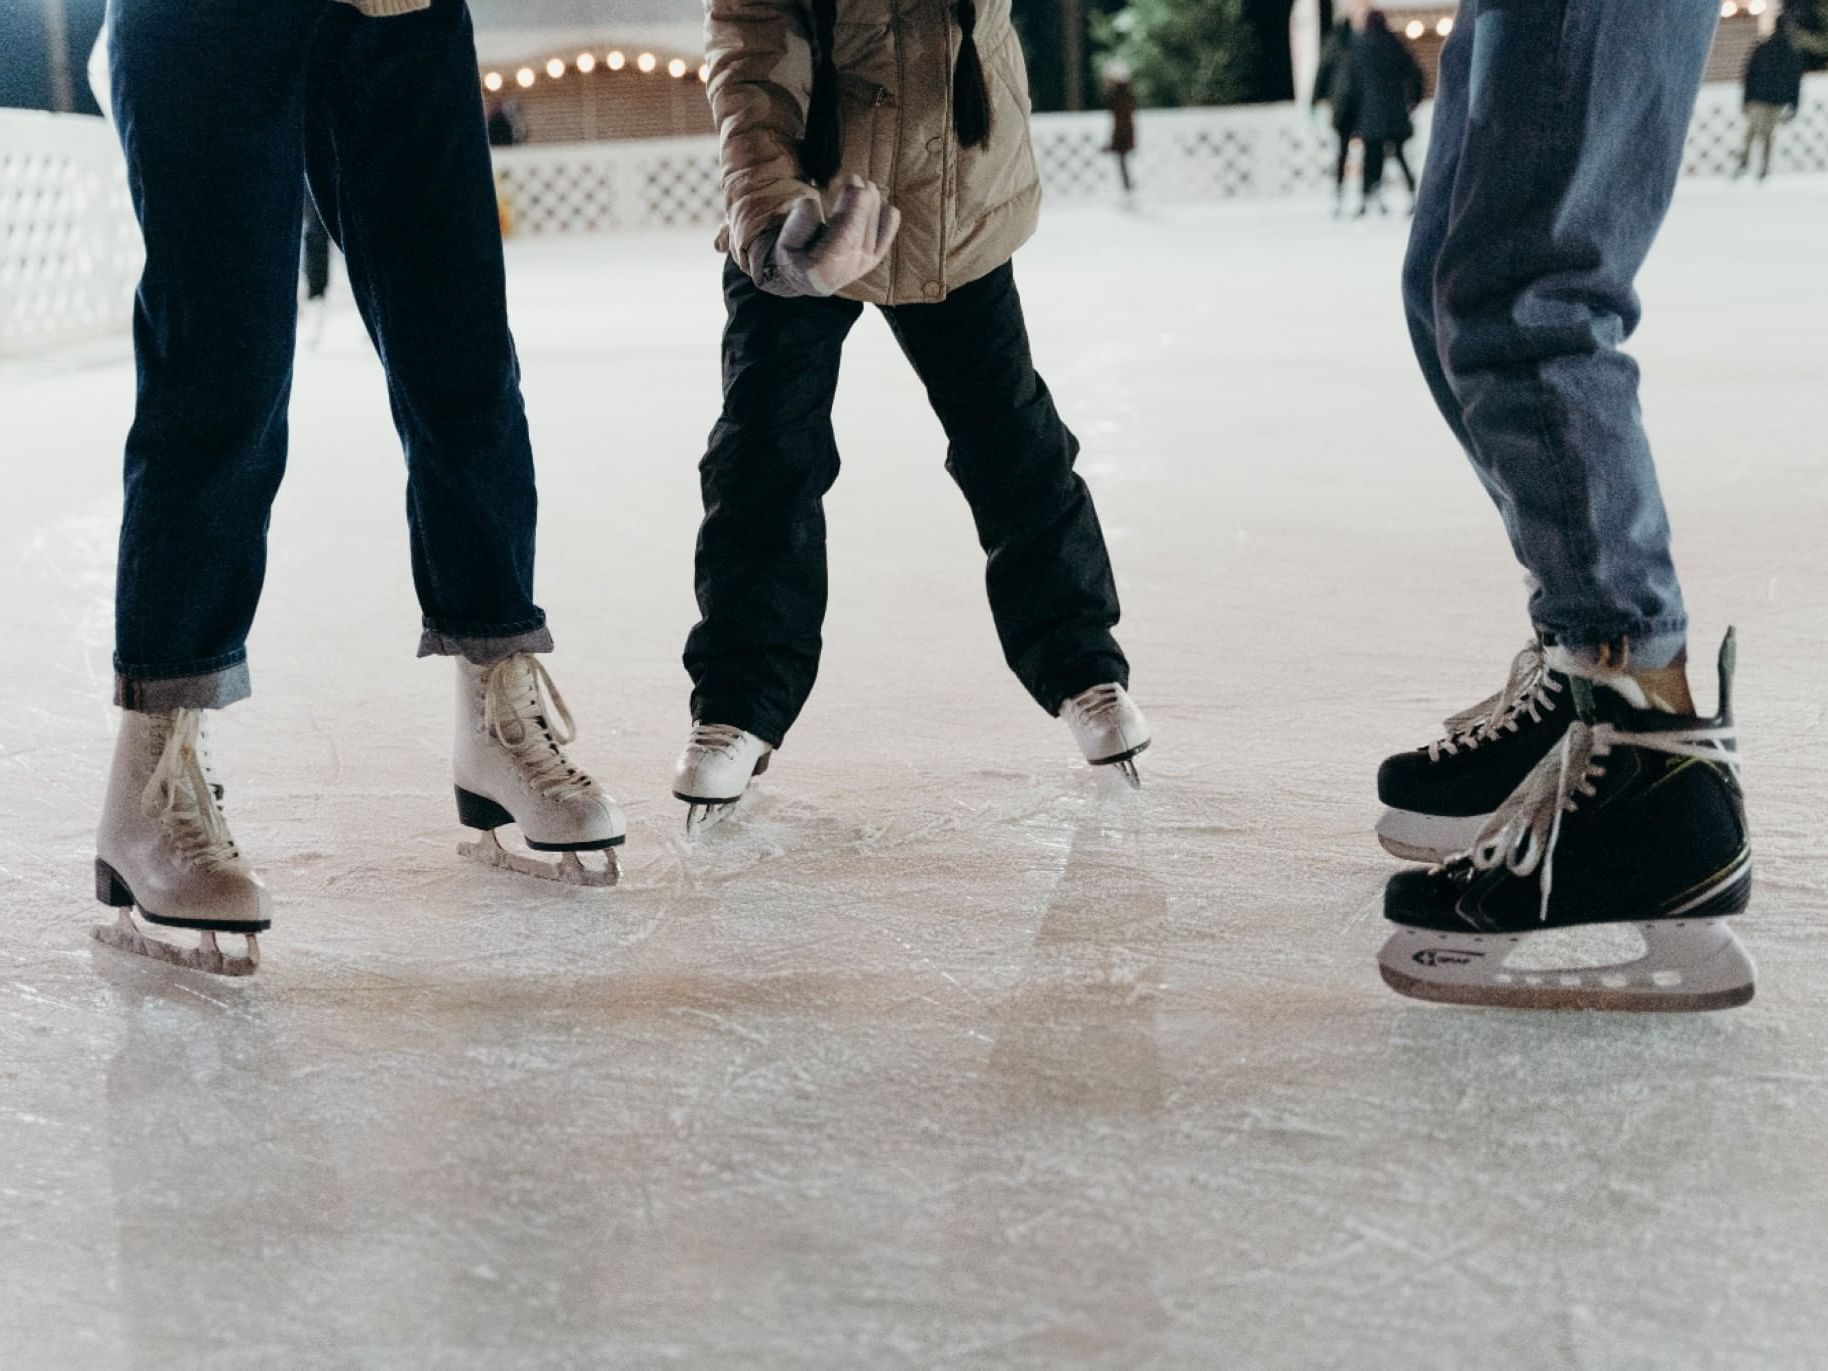 Three people ice skating on an outdoor rink at The Bethel Inn Resort & Suites